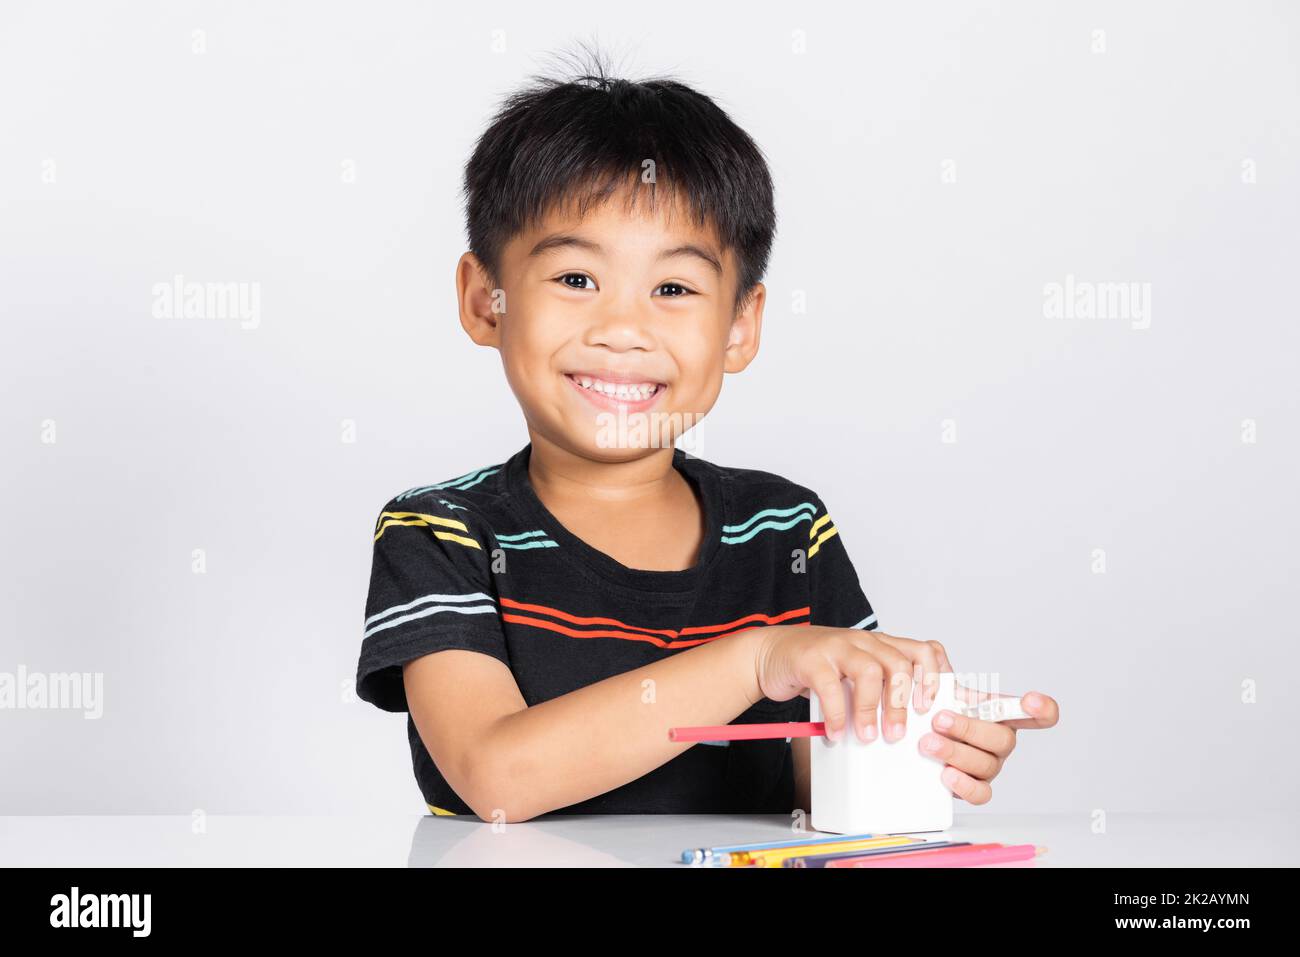 Little cute kid boy 5-6 years old smile using pencil sharpener while doing homework Stock Photo